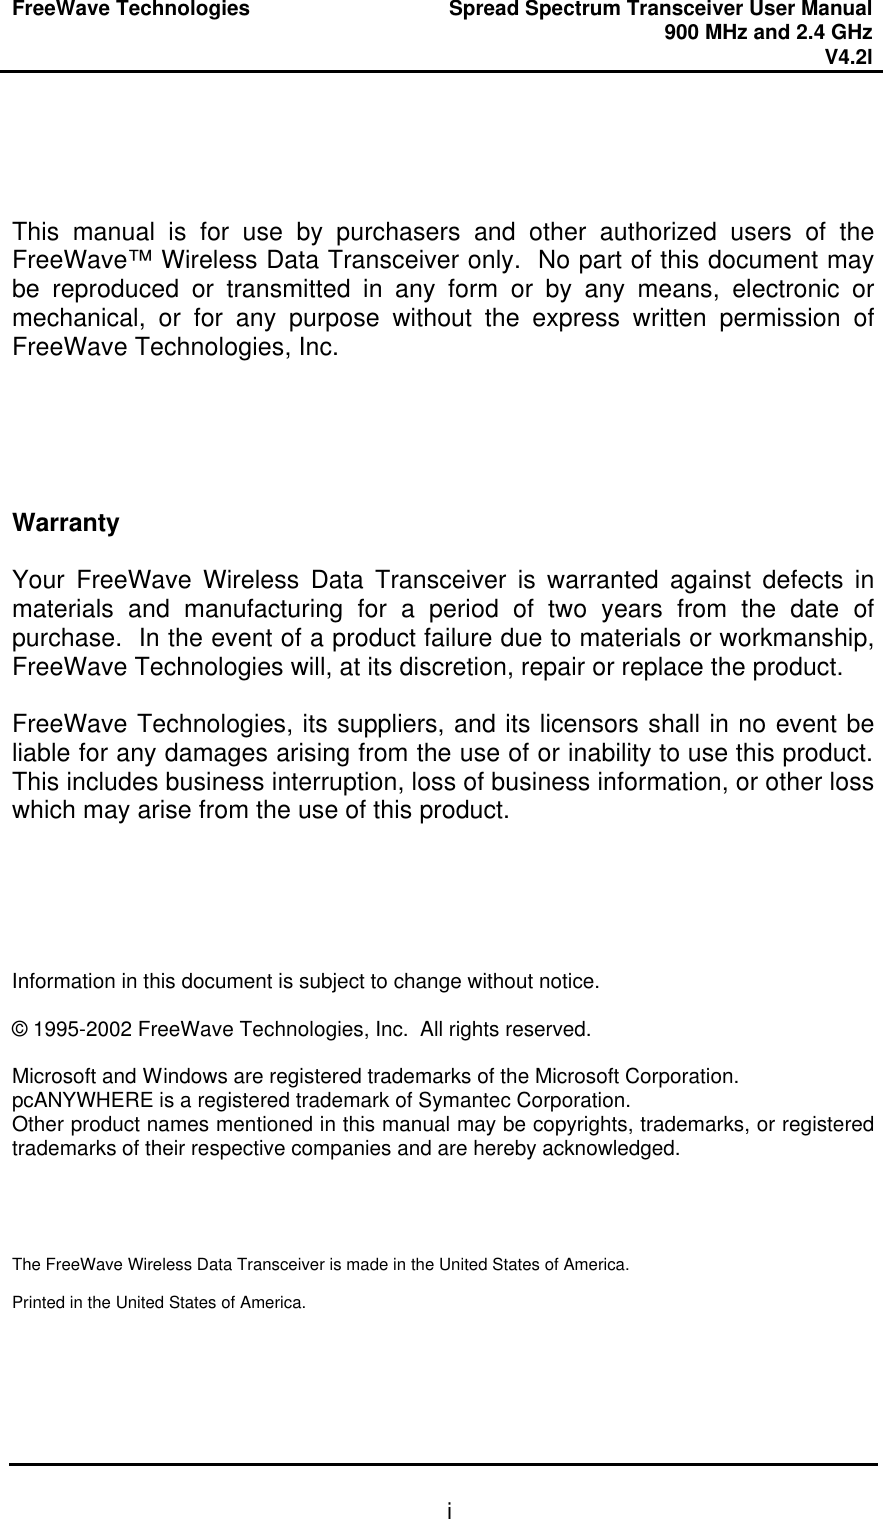 FreeWave Technologies Spread Spectrum Transceiver User Manual 900 MHz and 2.4 GHz V4.2l   i    This manual is for use by purchasers and other authorized users of the FreeWave™ Wireless Data Transceiver only.  No part of this document may be reproduced or transmitted in any form or by any means, electronic or mechanical, or for any purpose without the express written permission of FreeWave Technologies, Inc.      Warranty  Your FreeWave Wireless Data Transceiver is warranted against defects in materials and manufacturing for a period of two years from the date of purchase.  In the event of a product failure due to materials or workmanship, FreeWave Technologies will, at its discretion, repair or replace the product.  FreeWave Technologies, its suppliers, and its licensors shall in no event be liable for any damages arising from the use of or inability to use this product.  This includes business interruption, loss of business information, or other loss which may arise from the use of this product.      Information in this document is subject to change without notice.  © 1995-2002 FreeWave Technologies, Inc.  All rights reserved.  Microsoft and Windows are registered trademarks of the Microsoft Corporation. pcANYWHERE is a registered trademark of Symantec Corporation. Other product names mentioned in this manual may be copyrights, trademarks, or registered trademarks of their respective companies and are hereby acknowledged.     The FreeWave Wireless Data Transceiver is made in the United States of America.  Printed in the United States of America. 